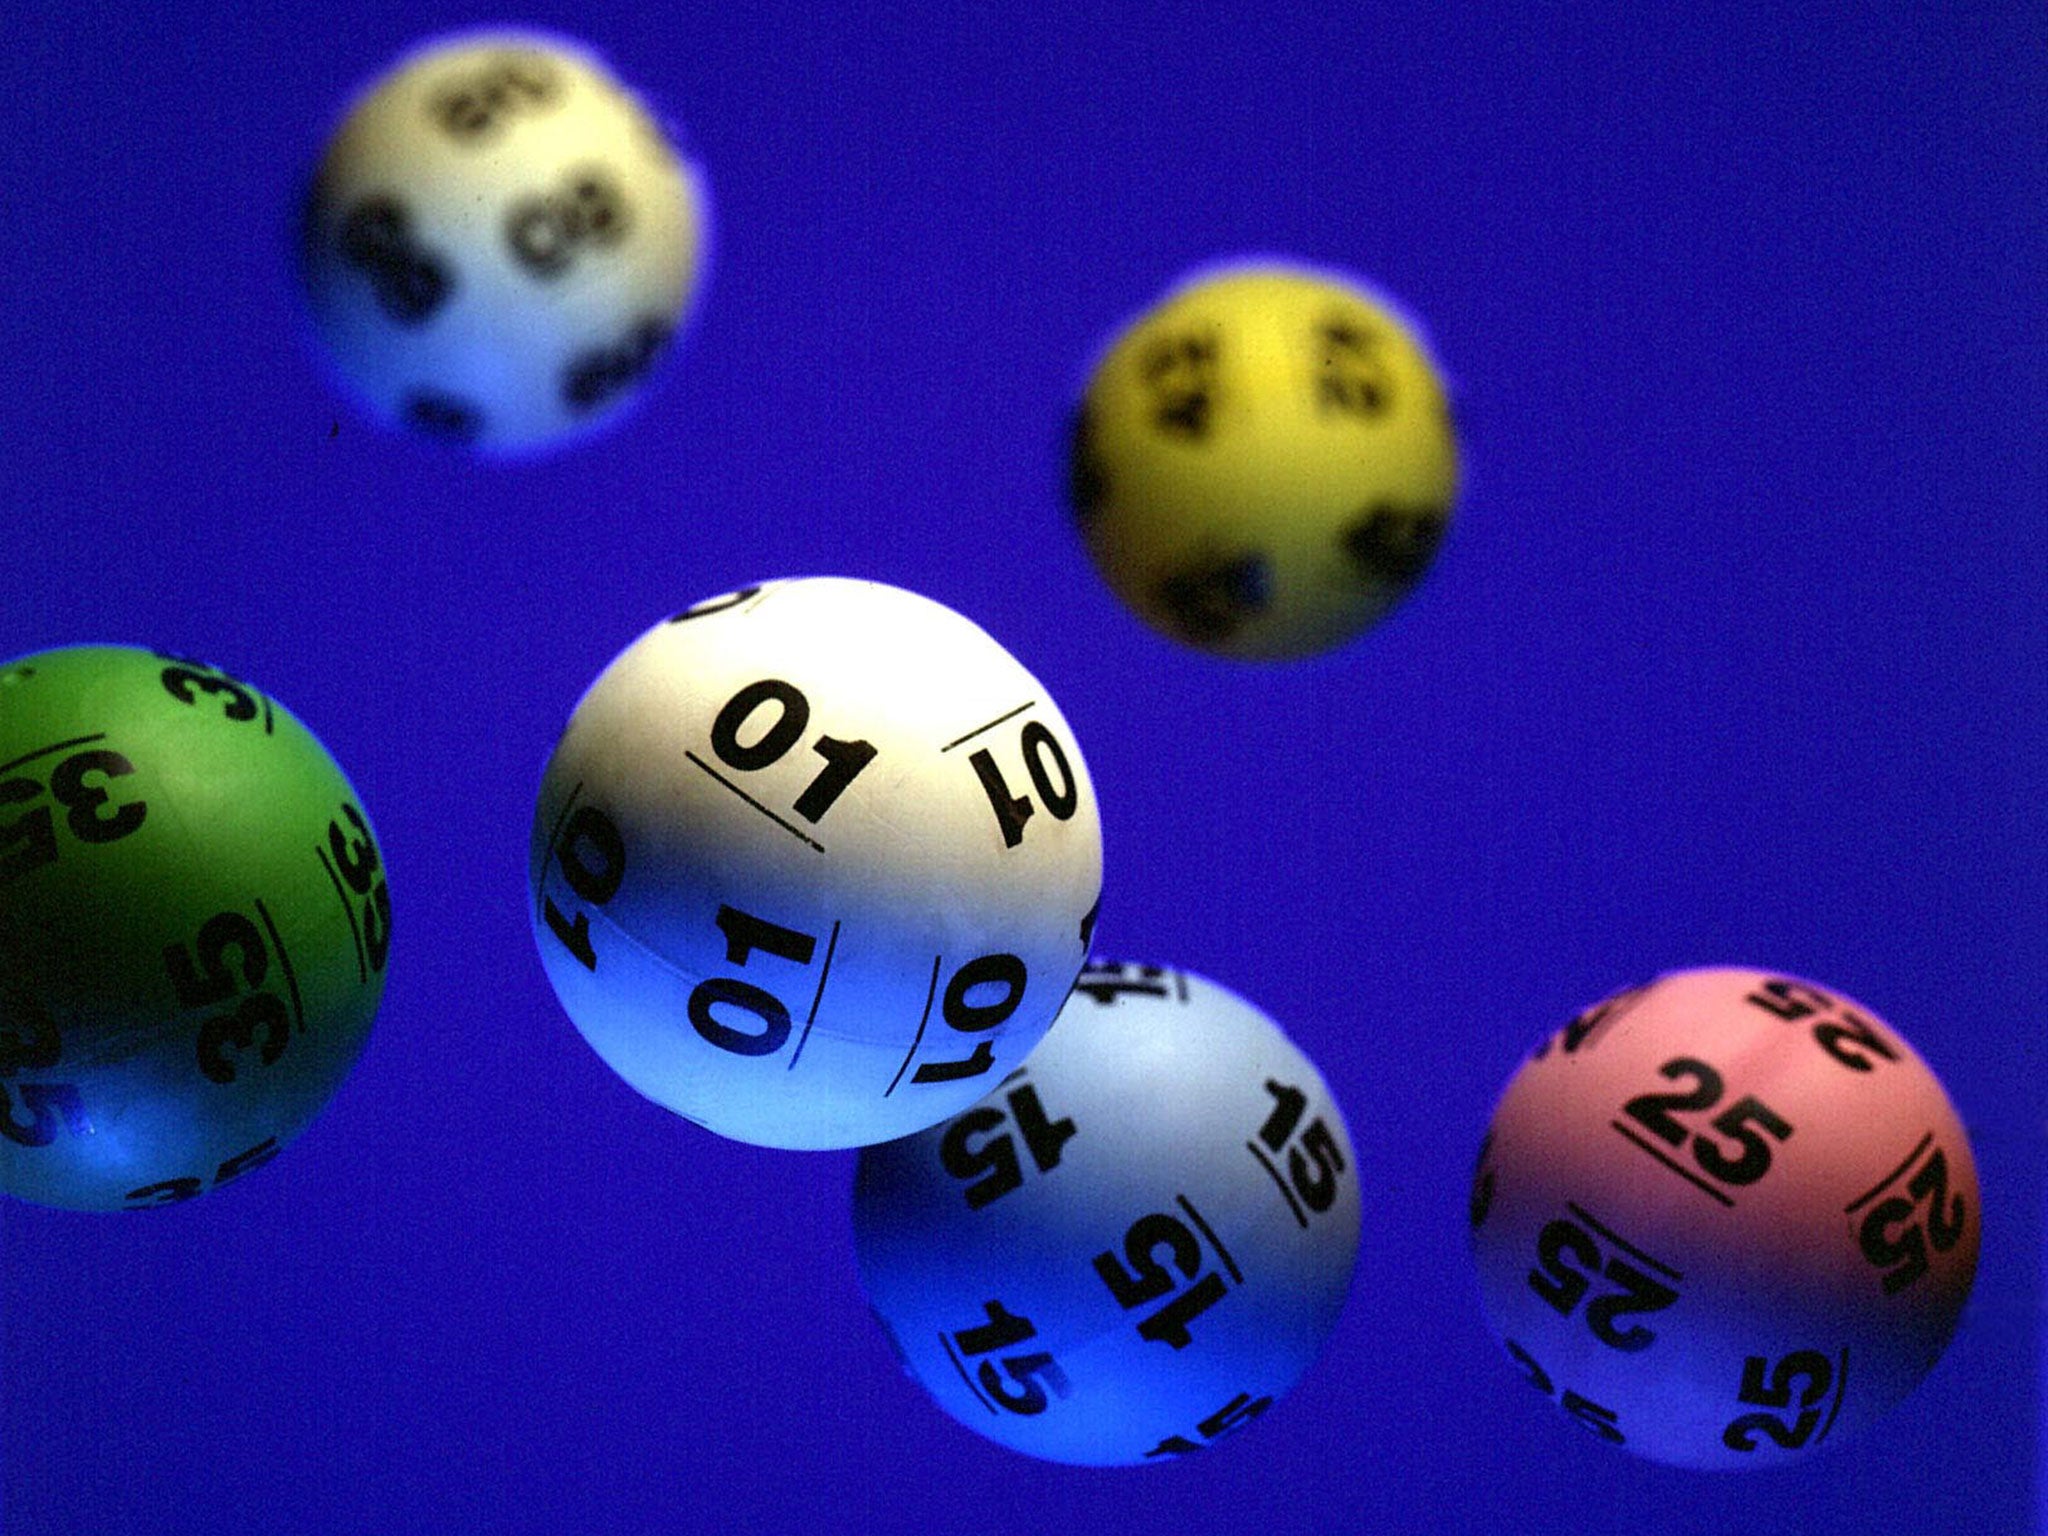 The jackpot has reached £50m after being rolled over 13 times